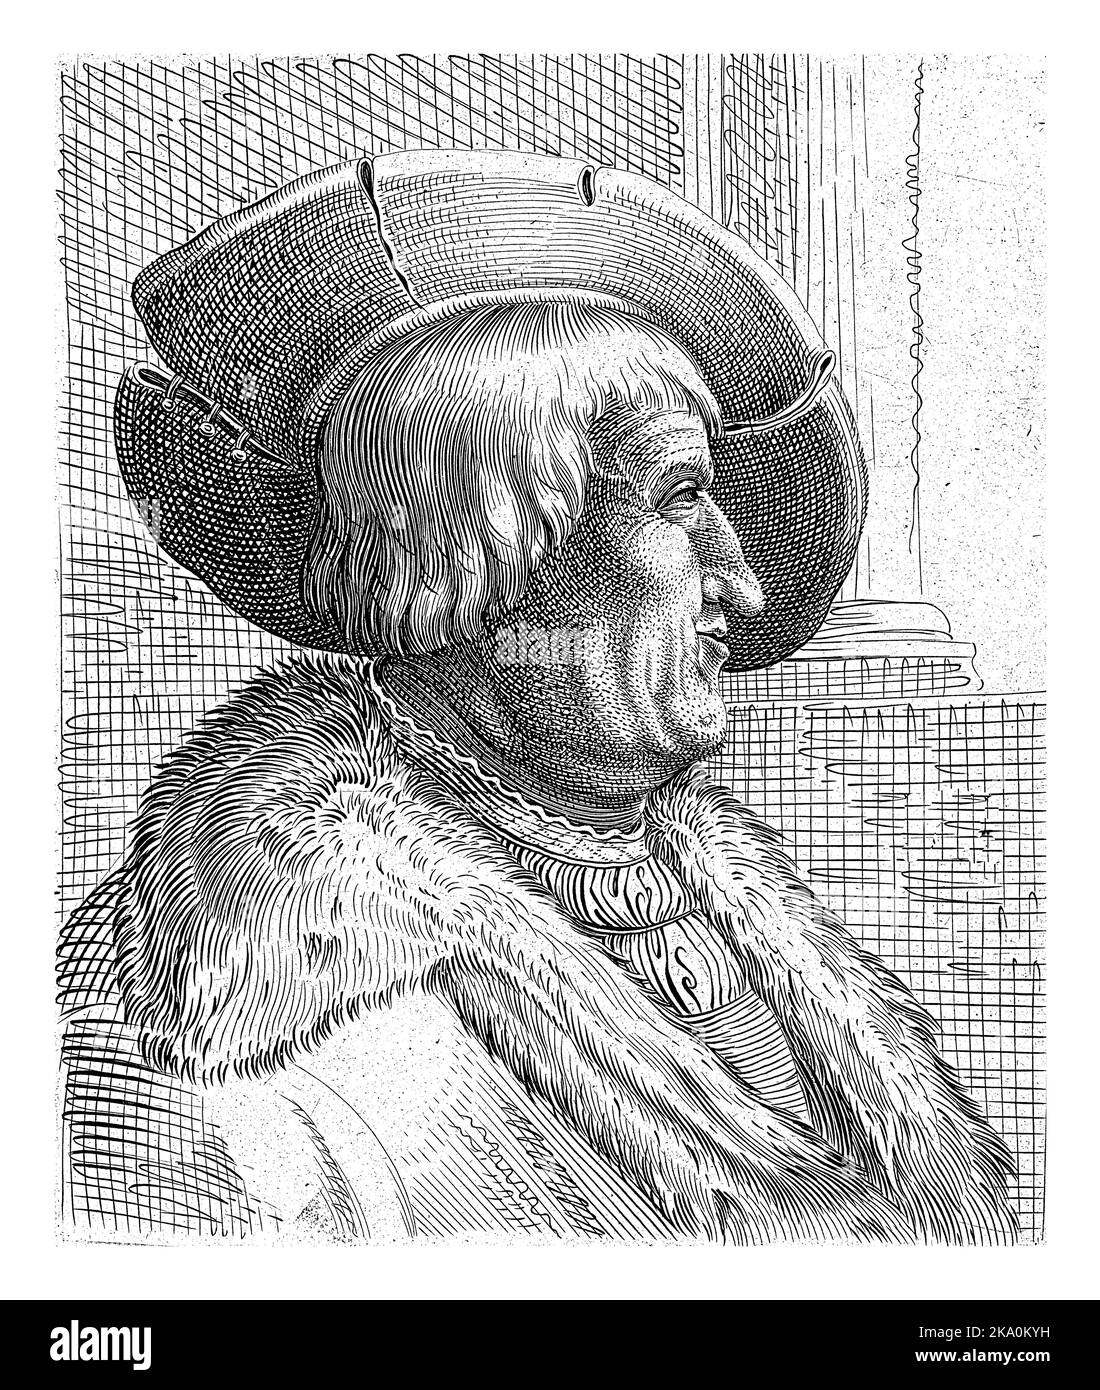 Profile portrait of an old man wearing a hat, anonymous, after Hendrick Goltzius, 1601 - 1652 Fantasy portrait in profile of an old man wearing a hat Stock Photo